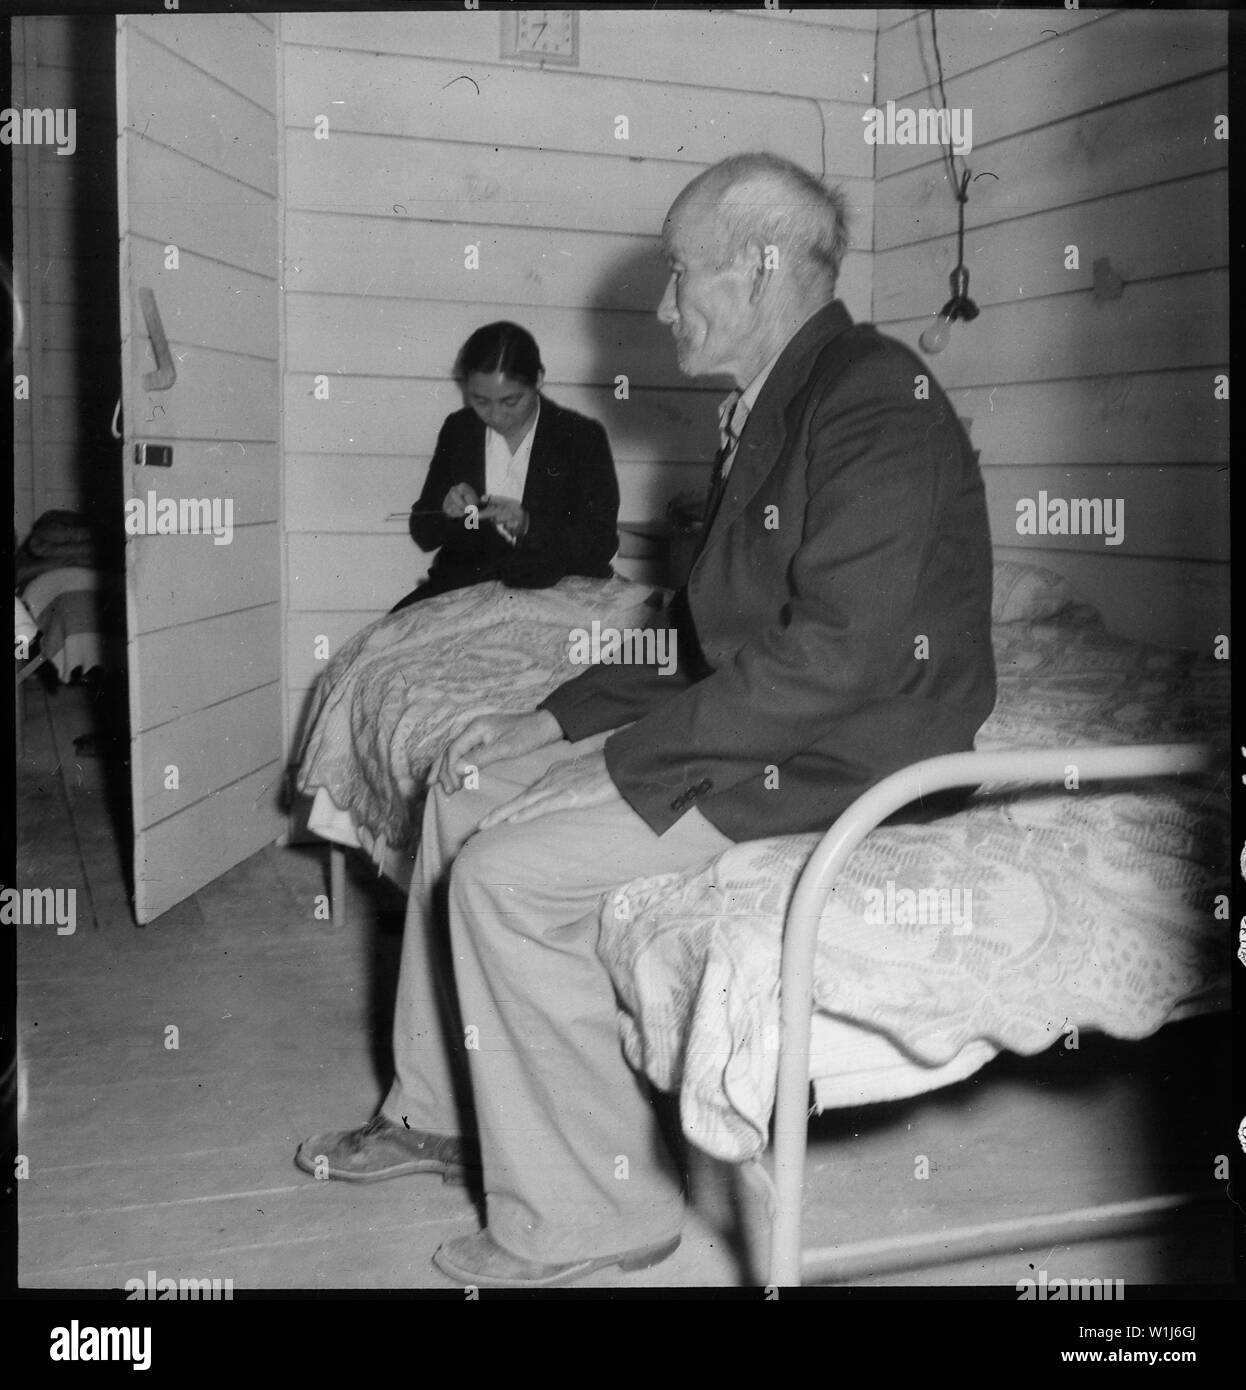 San Bruno, California. Old Mr. Konda in barrack apartment, after supper. He lives here with his tw . . .; Scope and content:  The full caption for this photograph reads: San Bruno, California. Old Mr. Konda in barrack apartment, after supper. He lives here with his two sons, his married daughter and her husband. They share two small rooms together. His daughter is seen behind him, knitting. He has been a truck farmer and raised his family who are also farmers, in Centerville, Alameda County where his children were born. Stock Photo